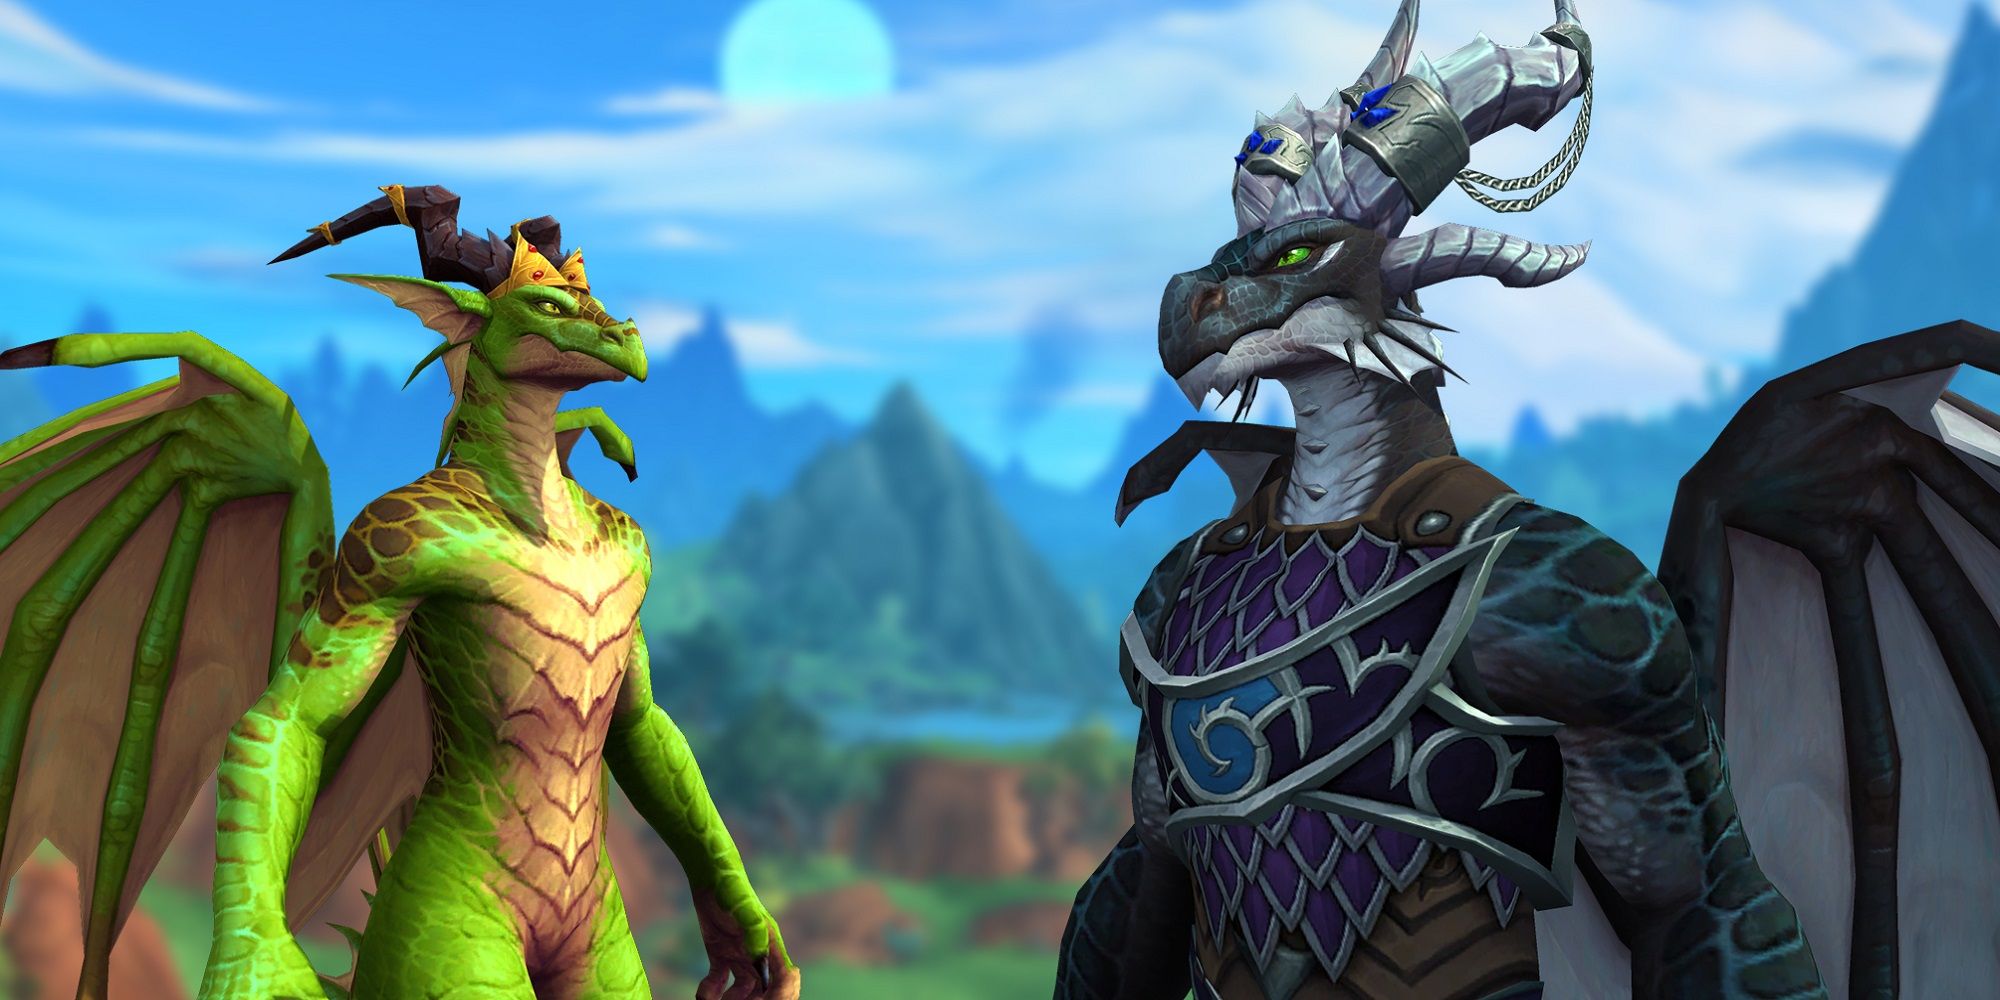 Two Dracthyr characters in WoW, the new race of the Dragonflight expansion.